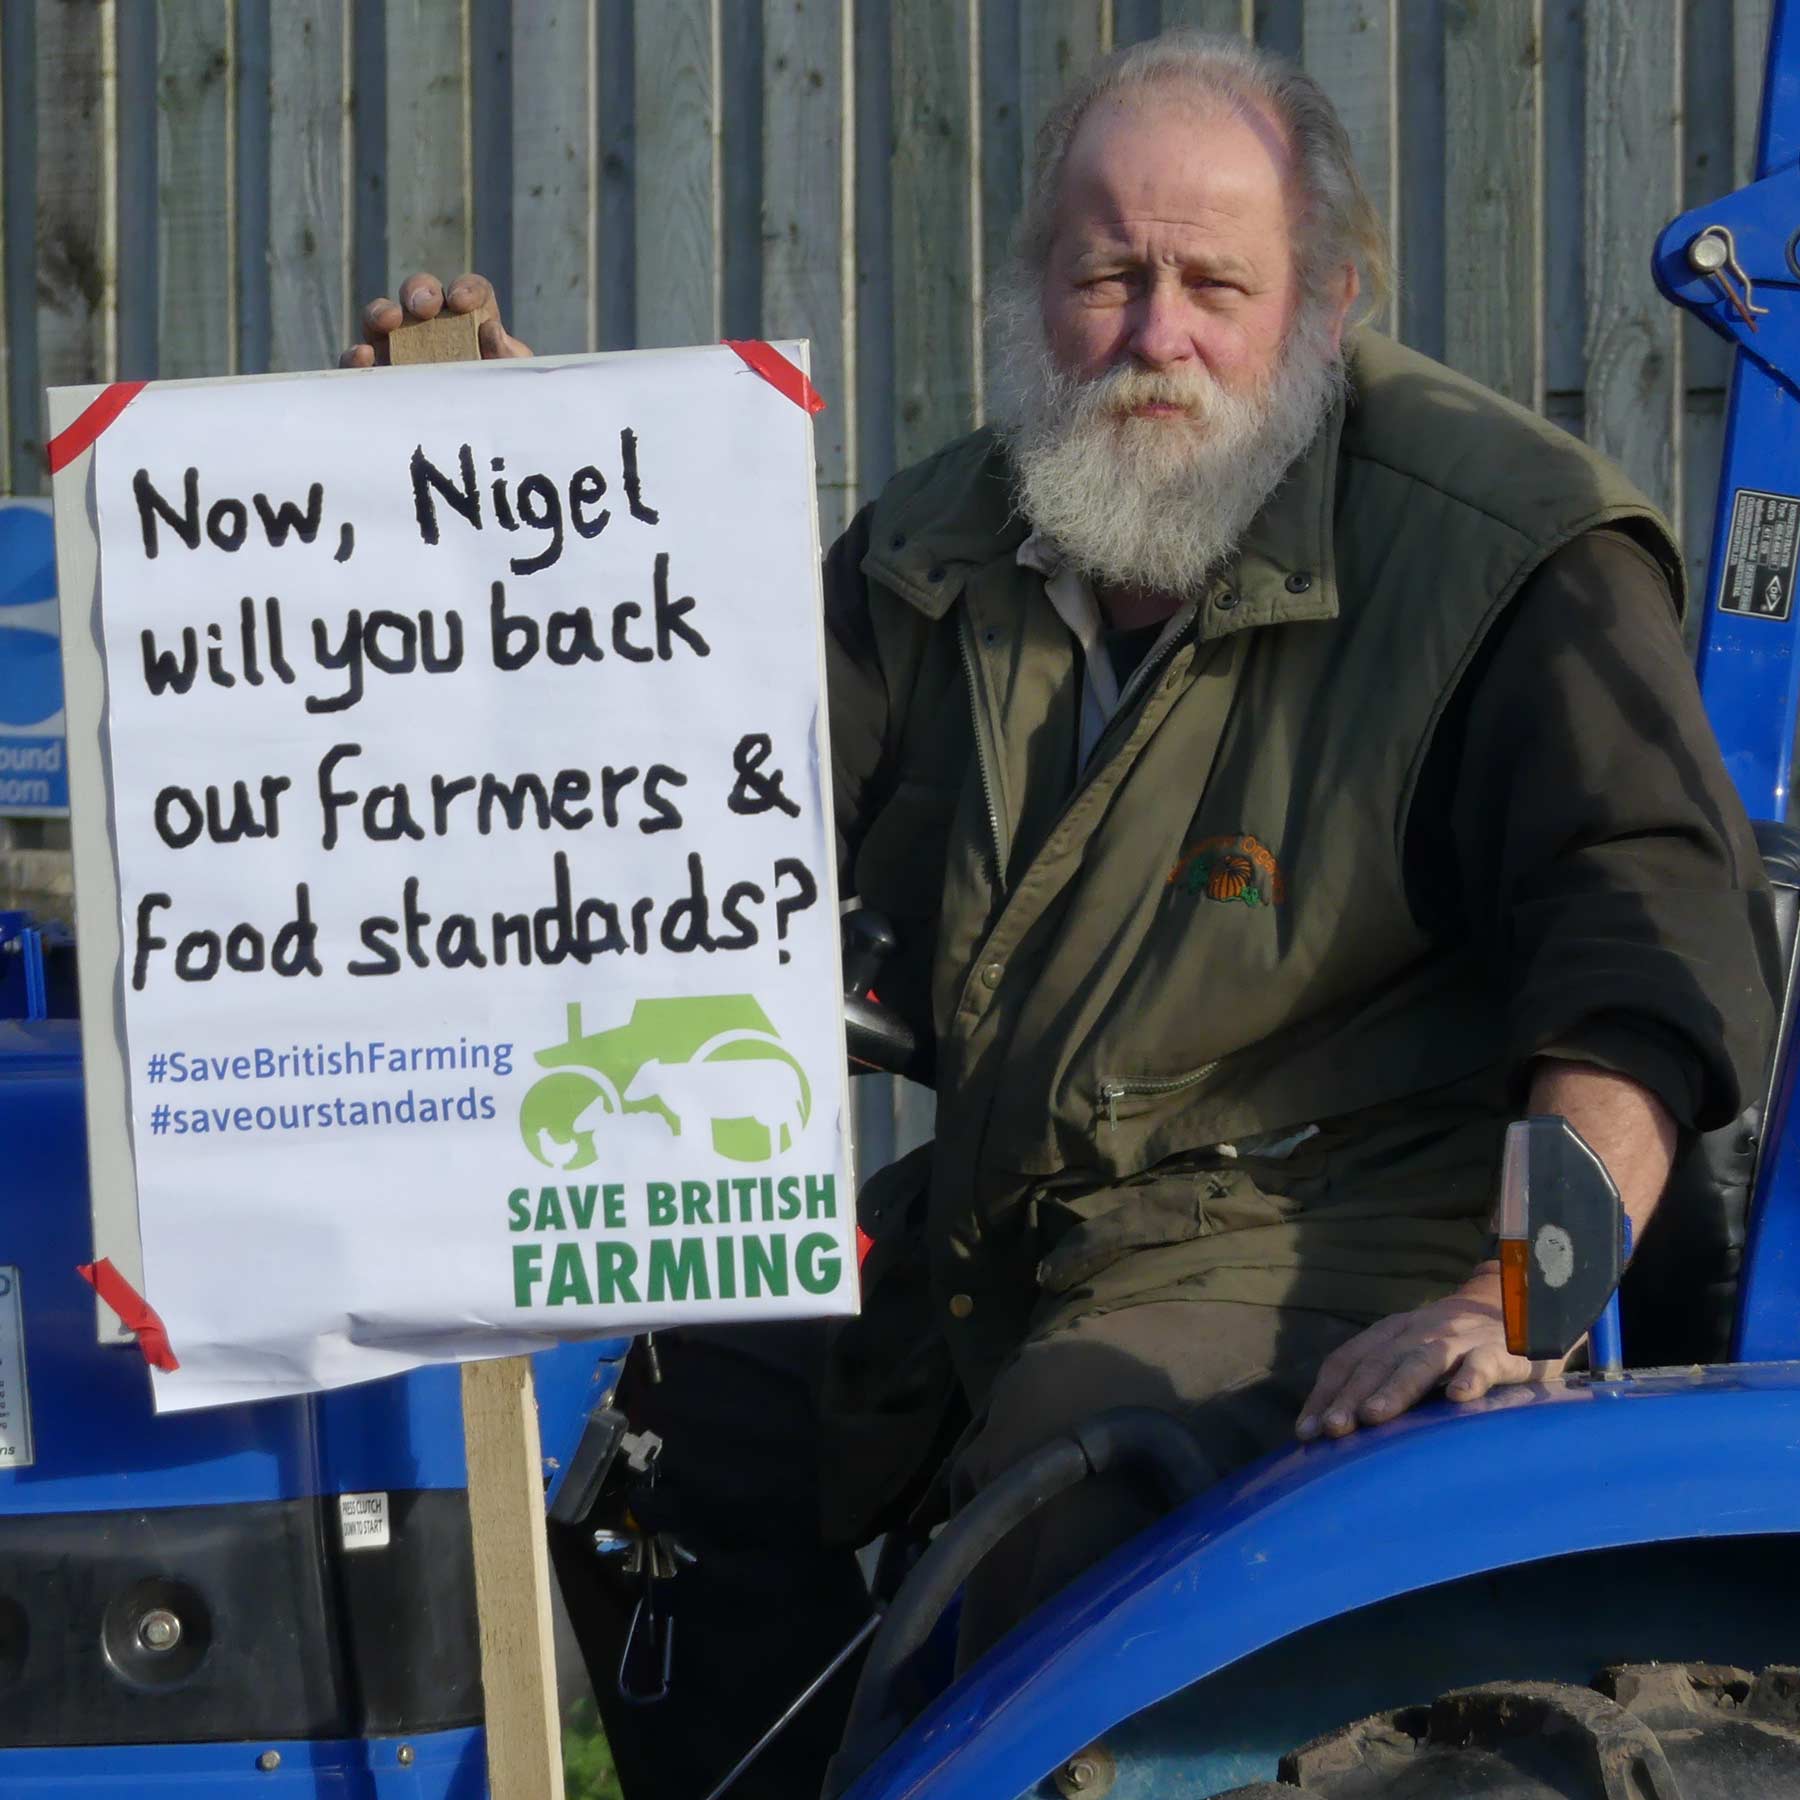 Arnold Warneken sitting on his blue tractor, holding a poster on his right saying ‘Now Nigel will you back our farmers and food standards?’